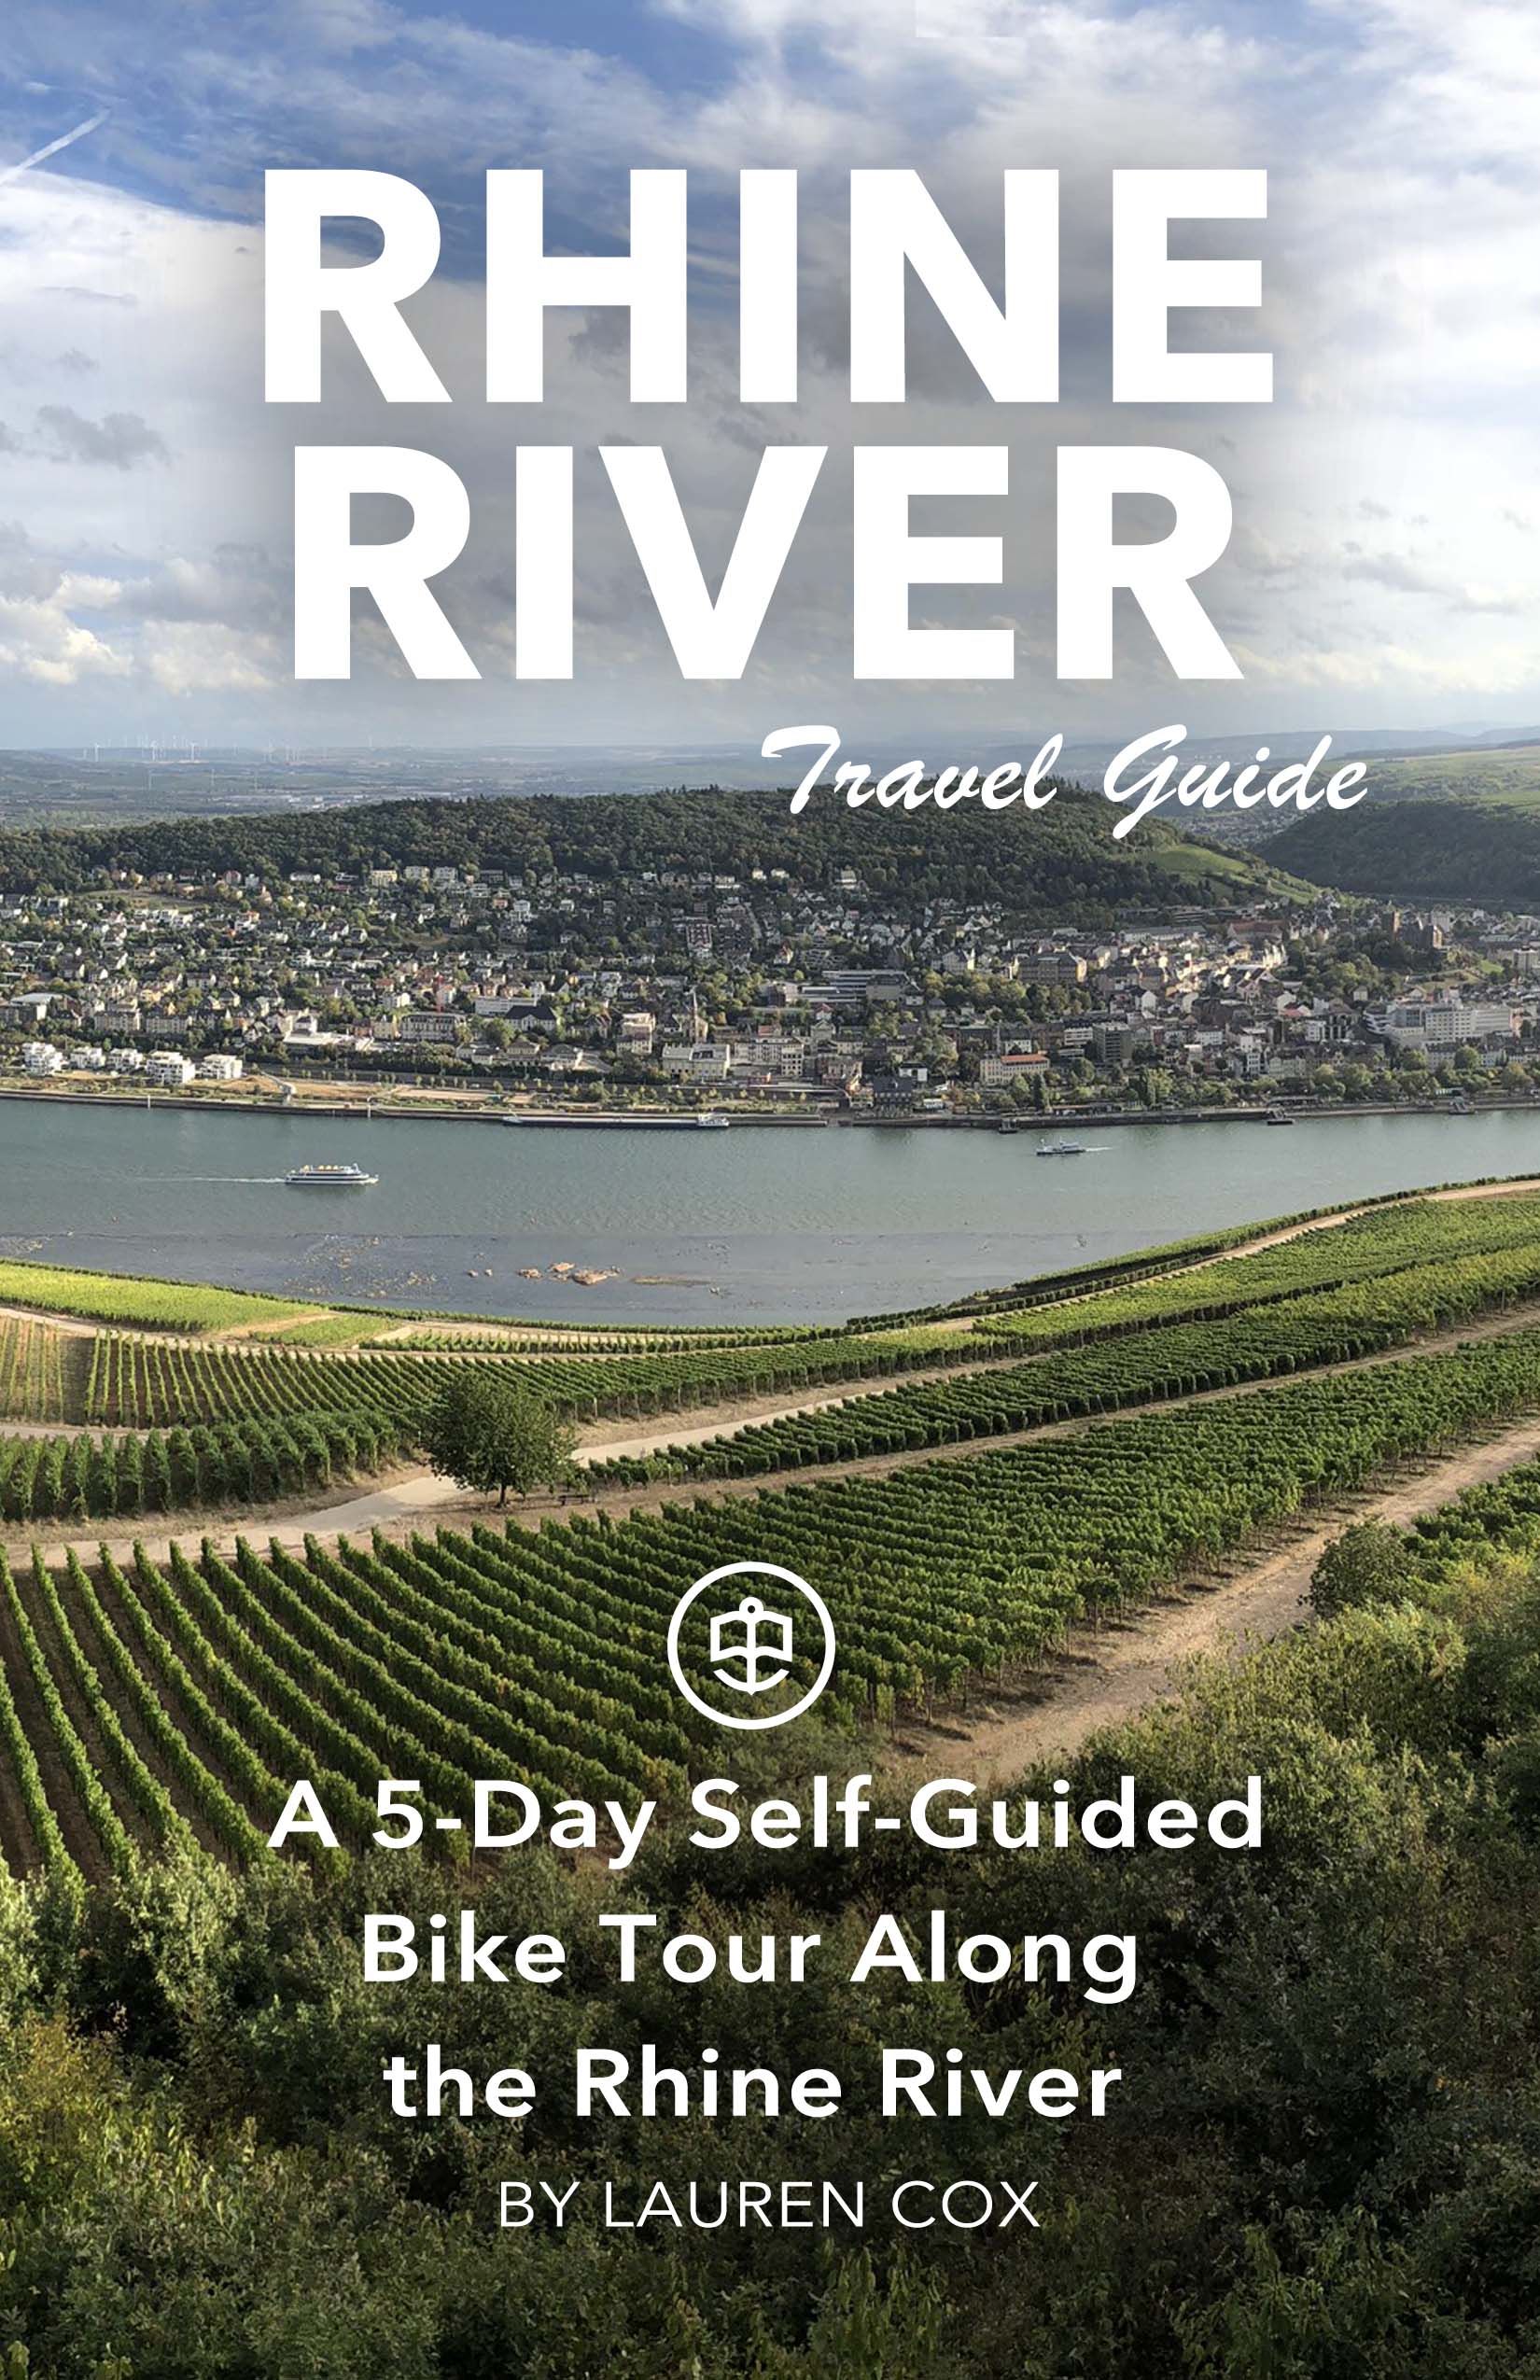 A 5-Day Self-Guided Bike Tour Along the Rhine River